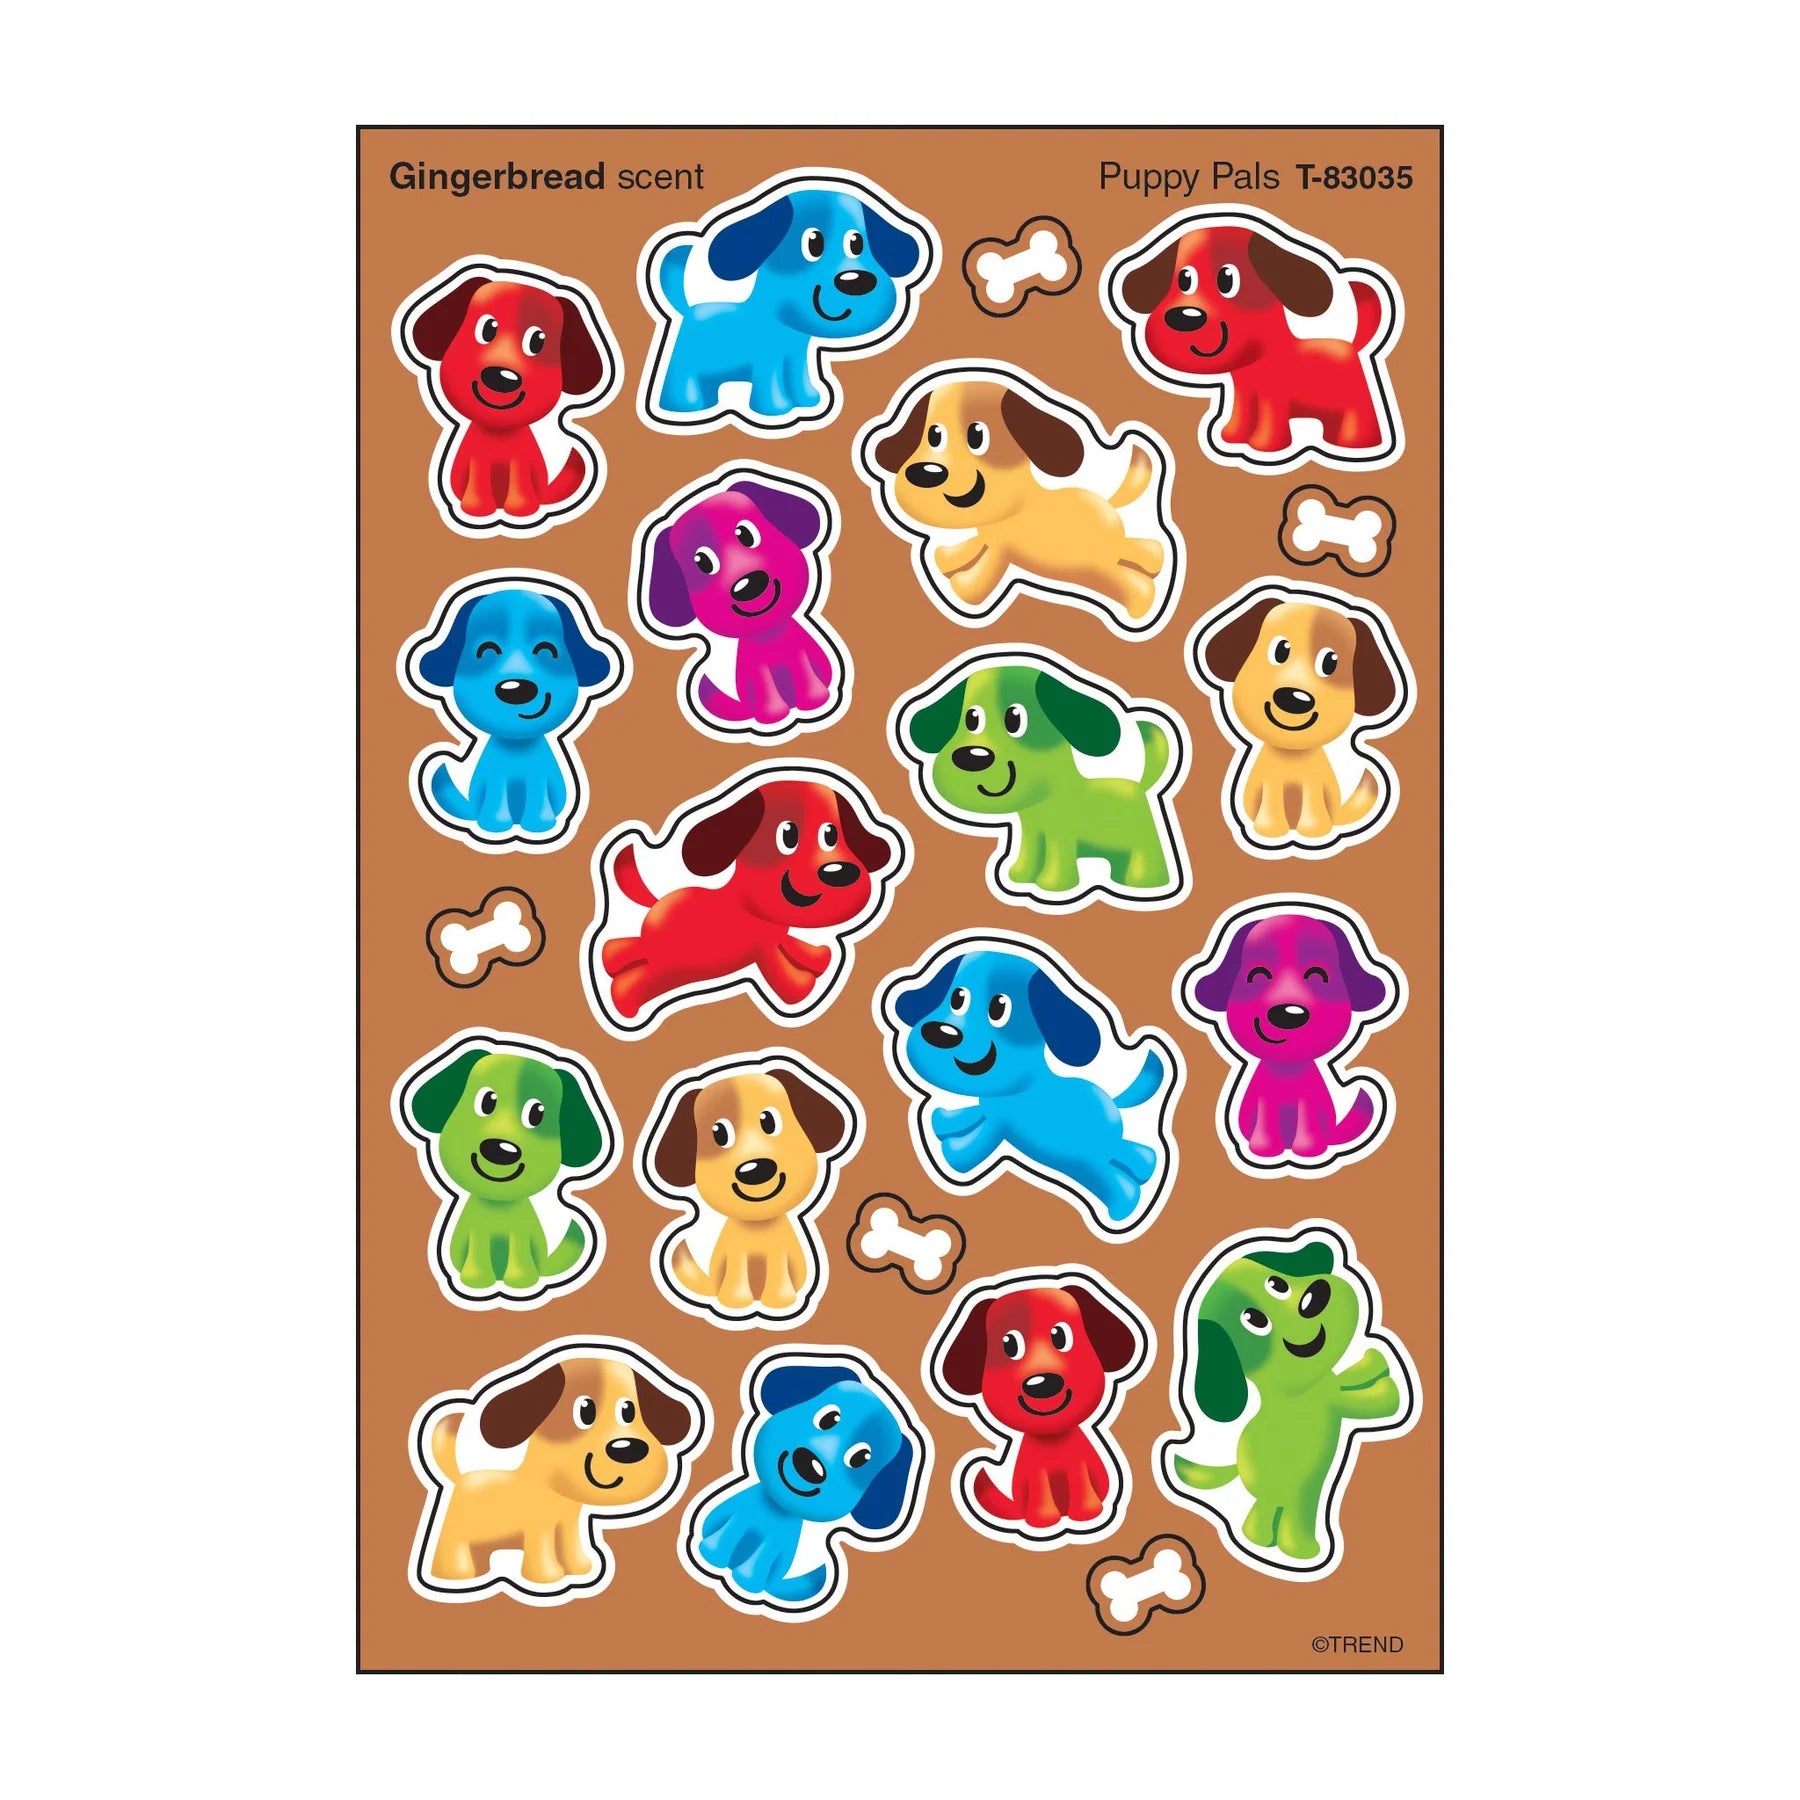 Puppy Pals, Gingerbread scent Scratch 'n Sniff Stinky Stickers® – Mixed Shapes